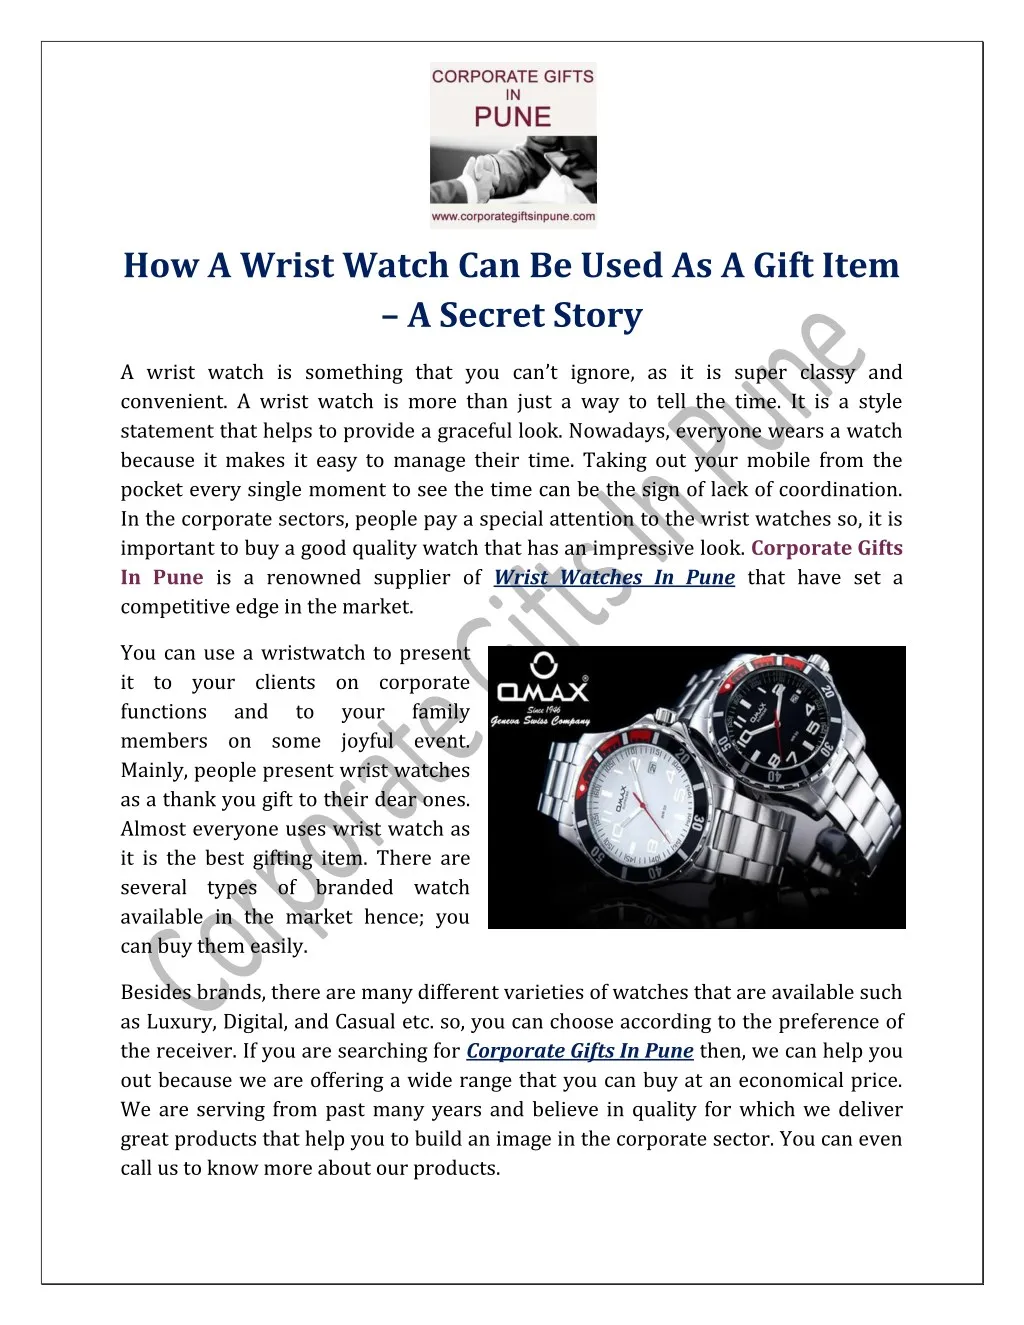 how a wrist watch can be used as a gift item